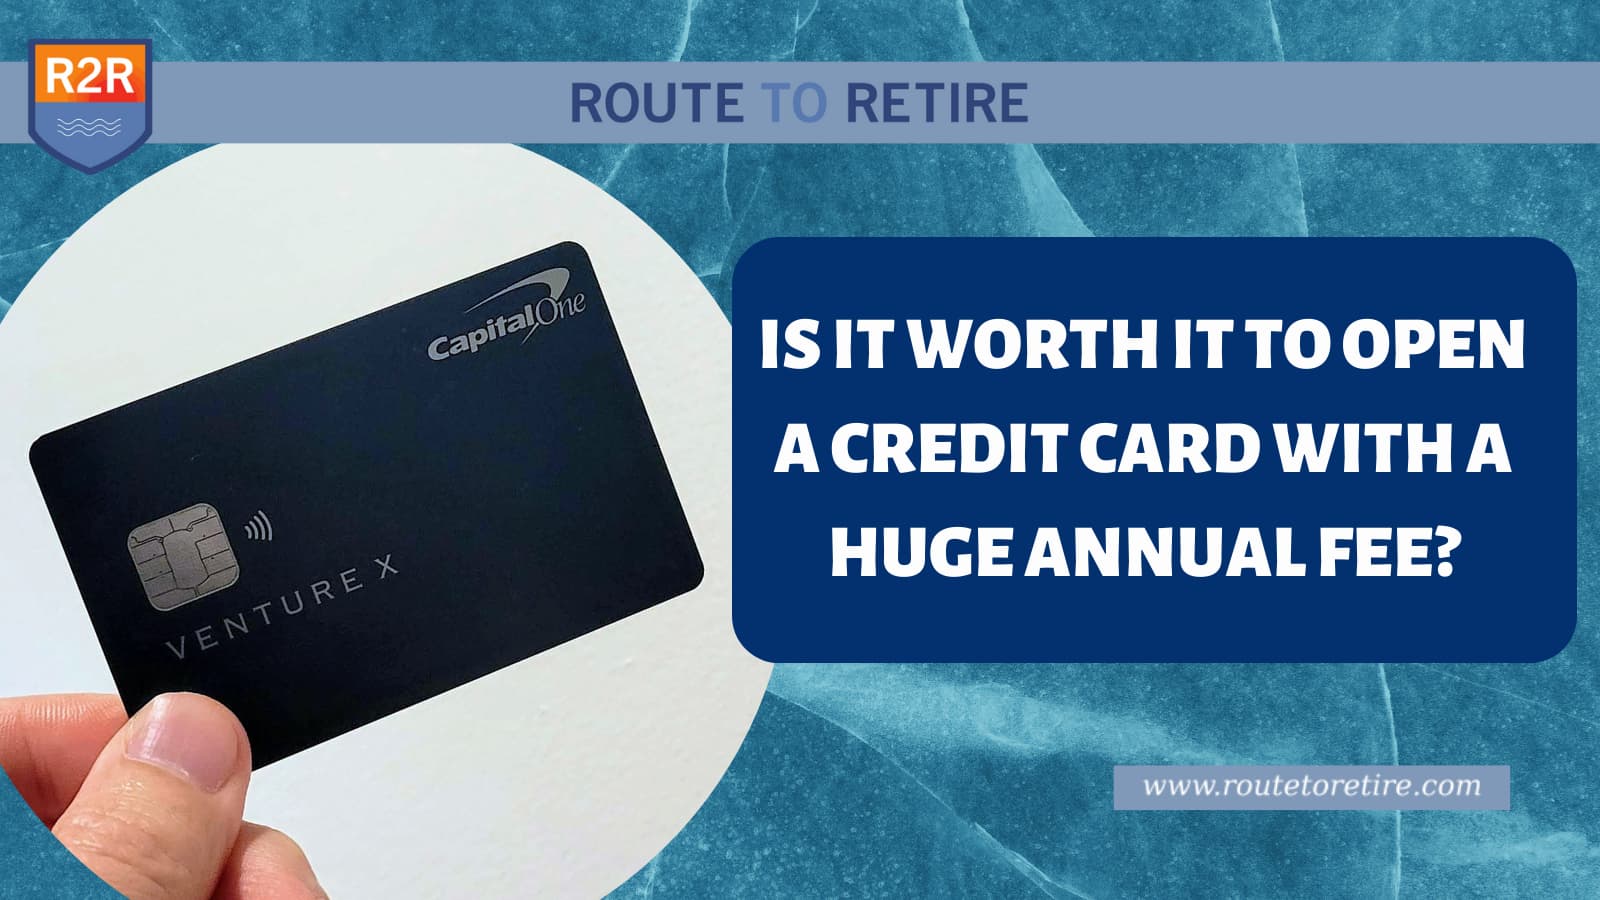 Is It Worth It to Open a Credit Card With a Huge Annual Fee?